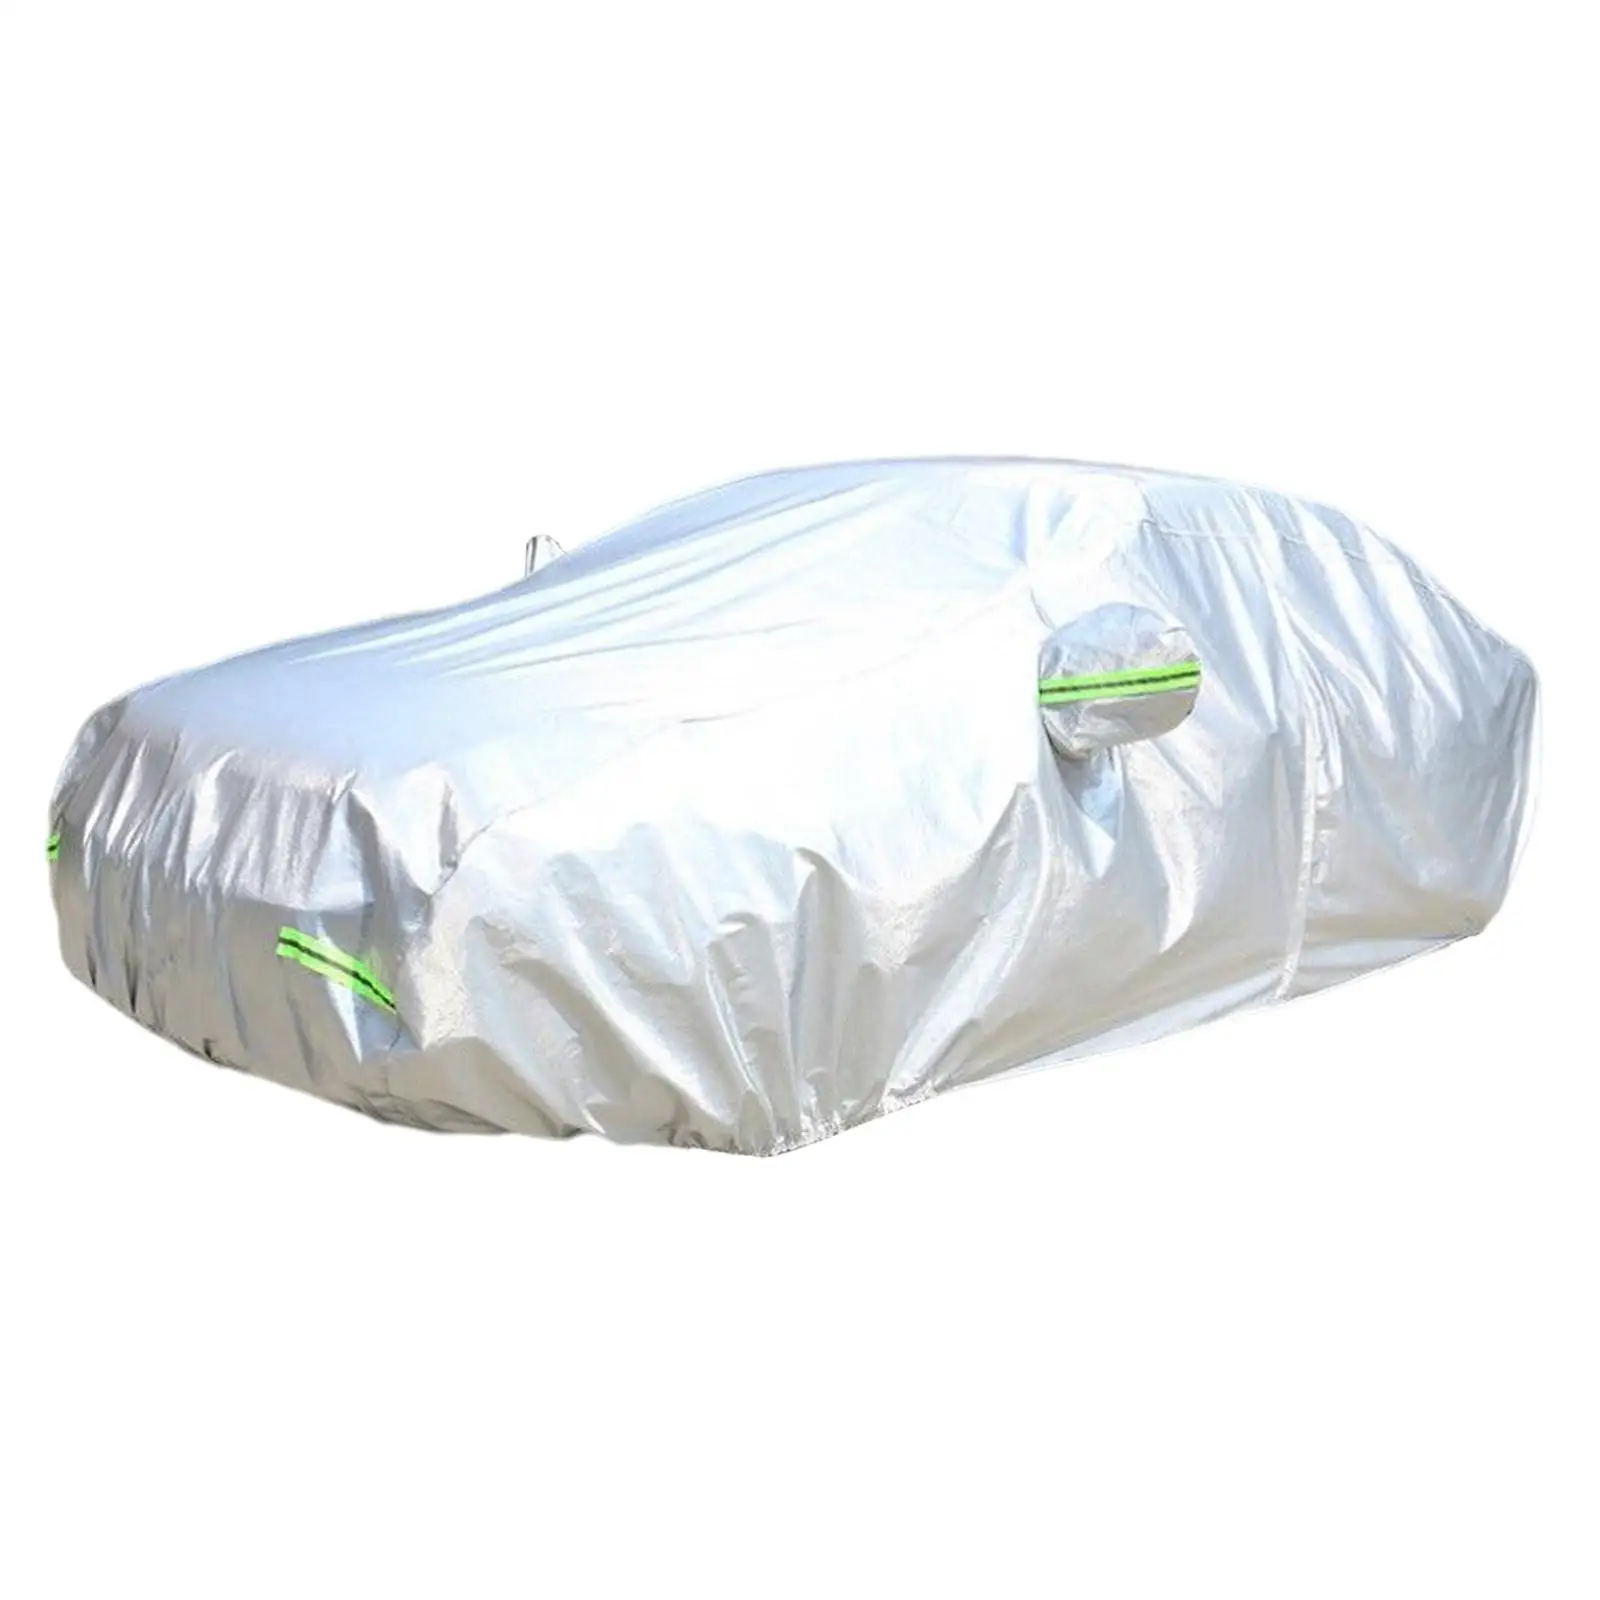 Full Car Cover Exterior Accessories Waterproof for Byd Atto 3 Yuan